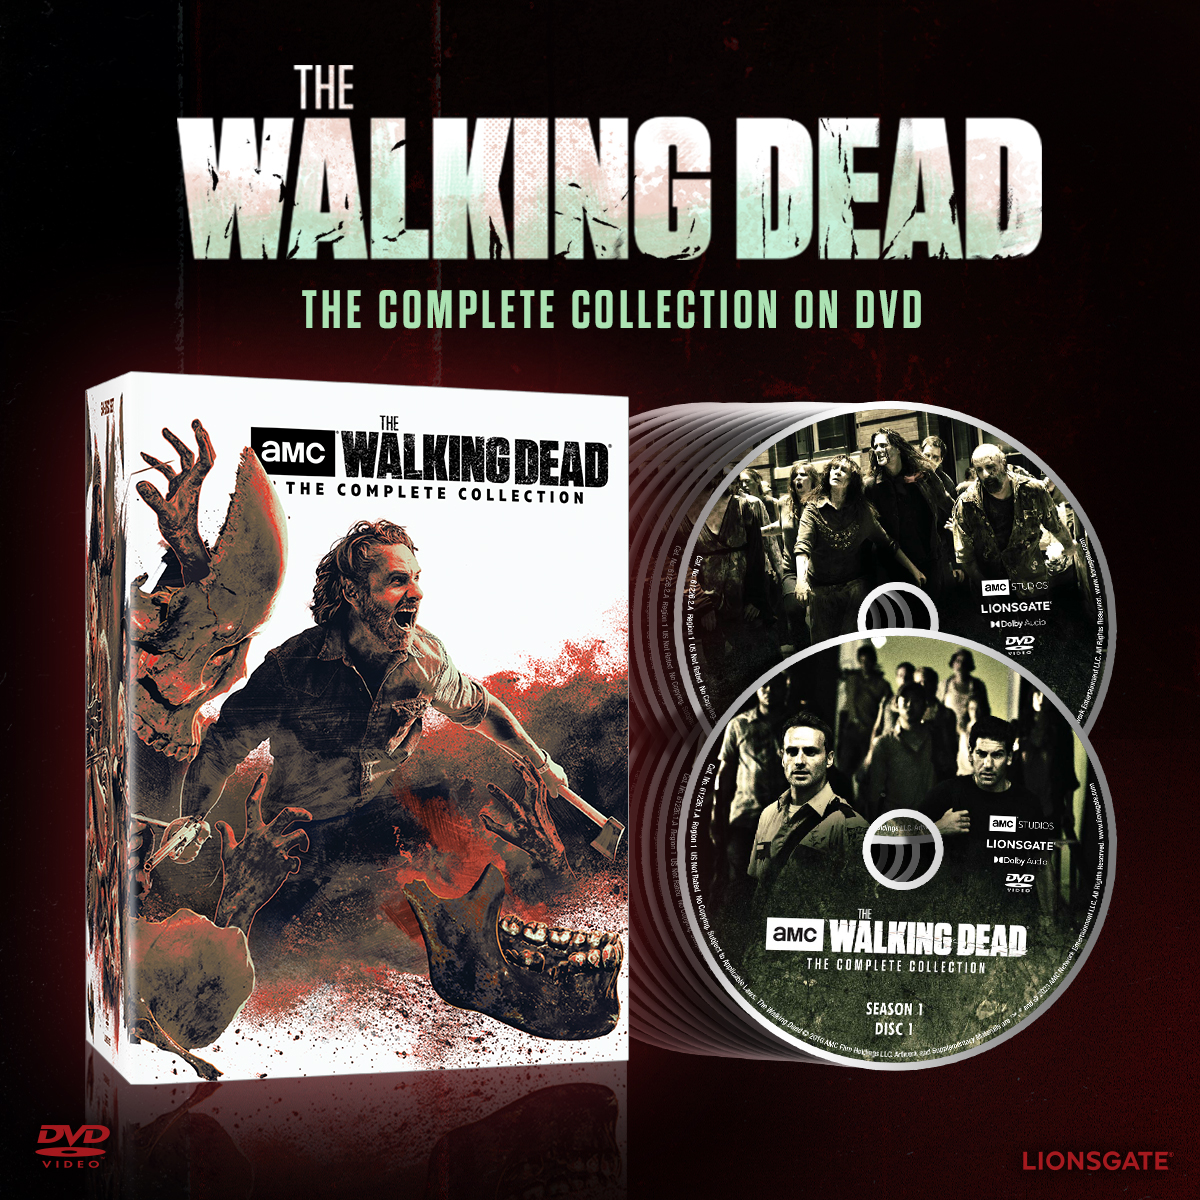 The Walking Dead The Complete Collection DVD cover (Lionsgate)